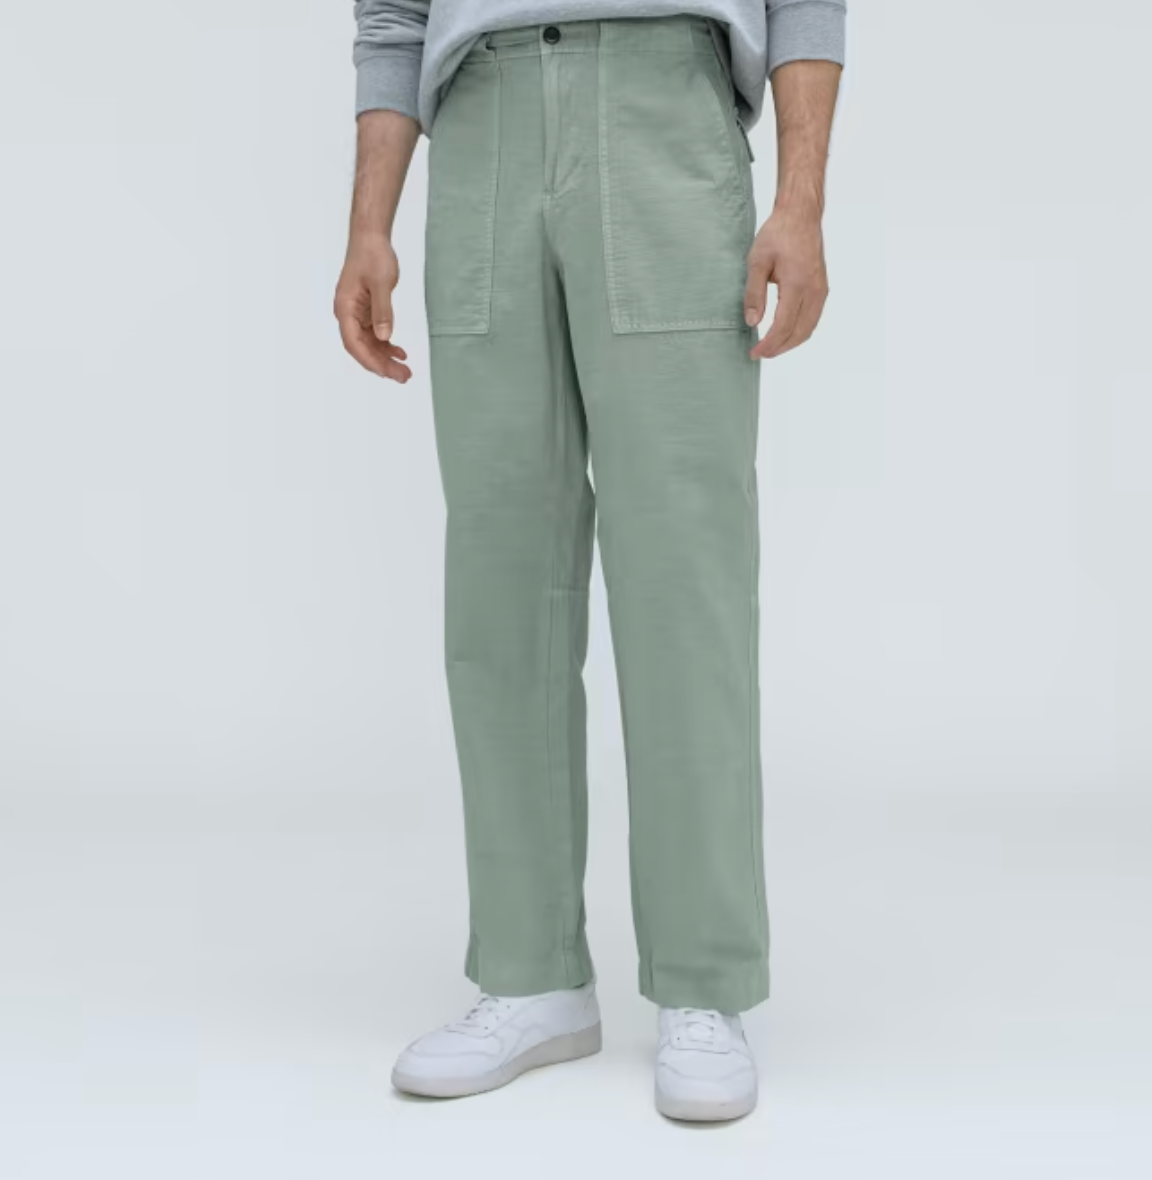 The Utility Pant